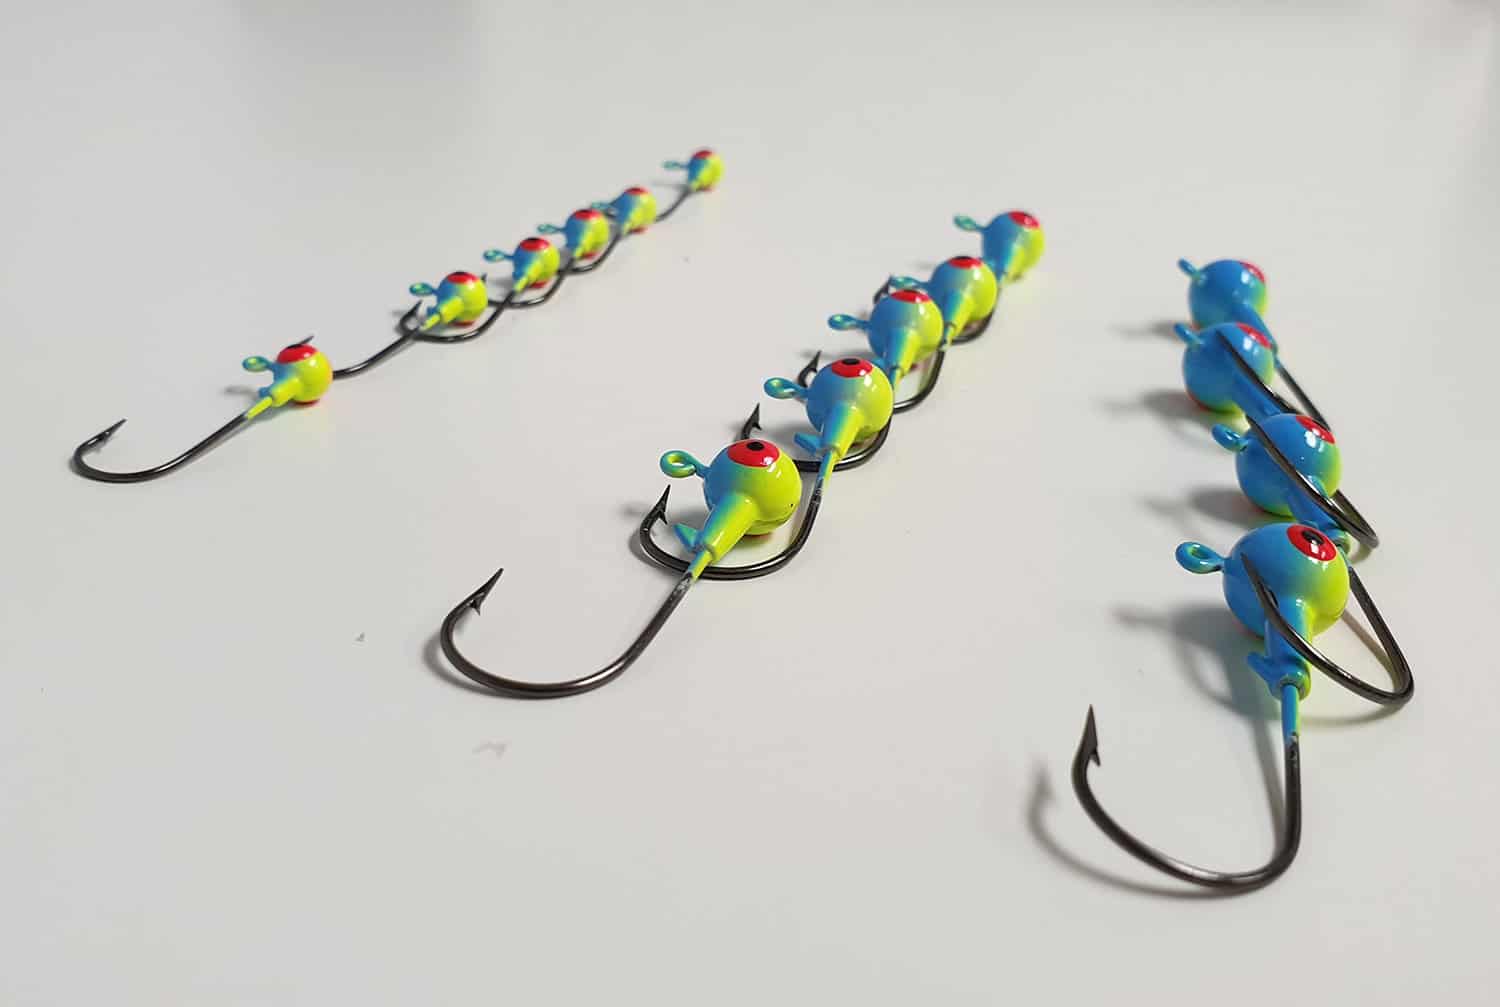 Jig head fishing gear different sizes